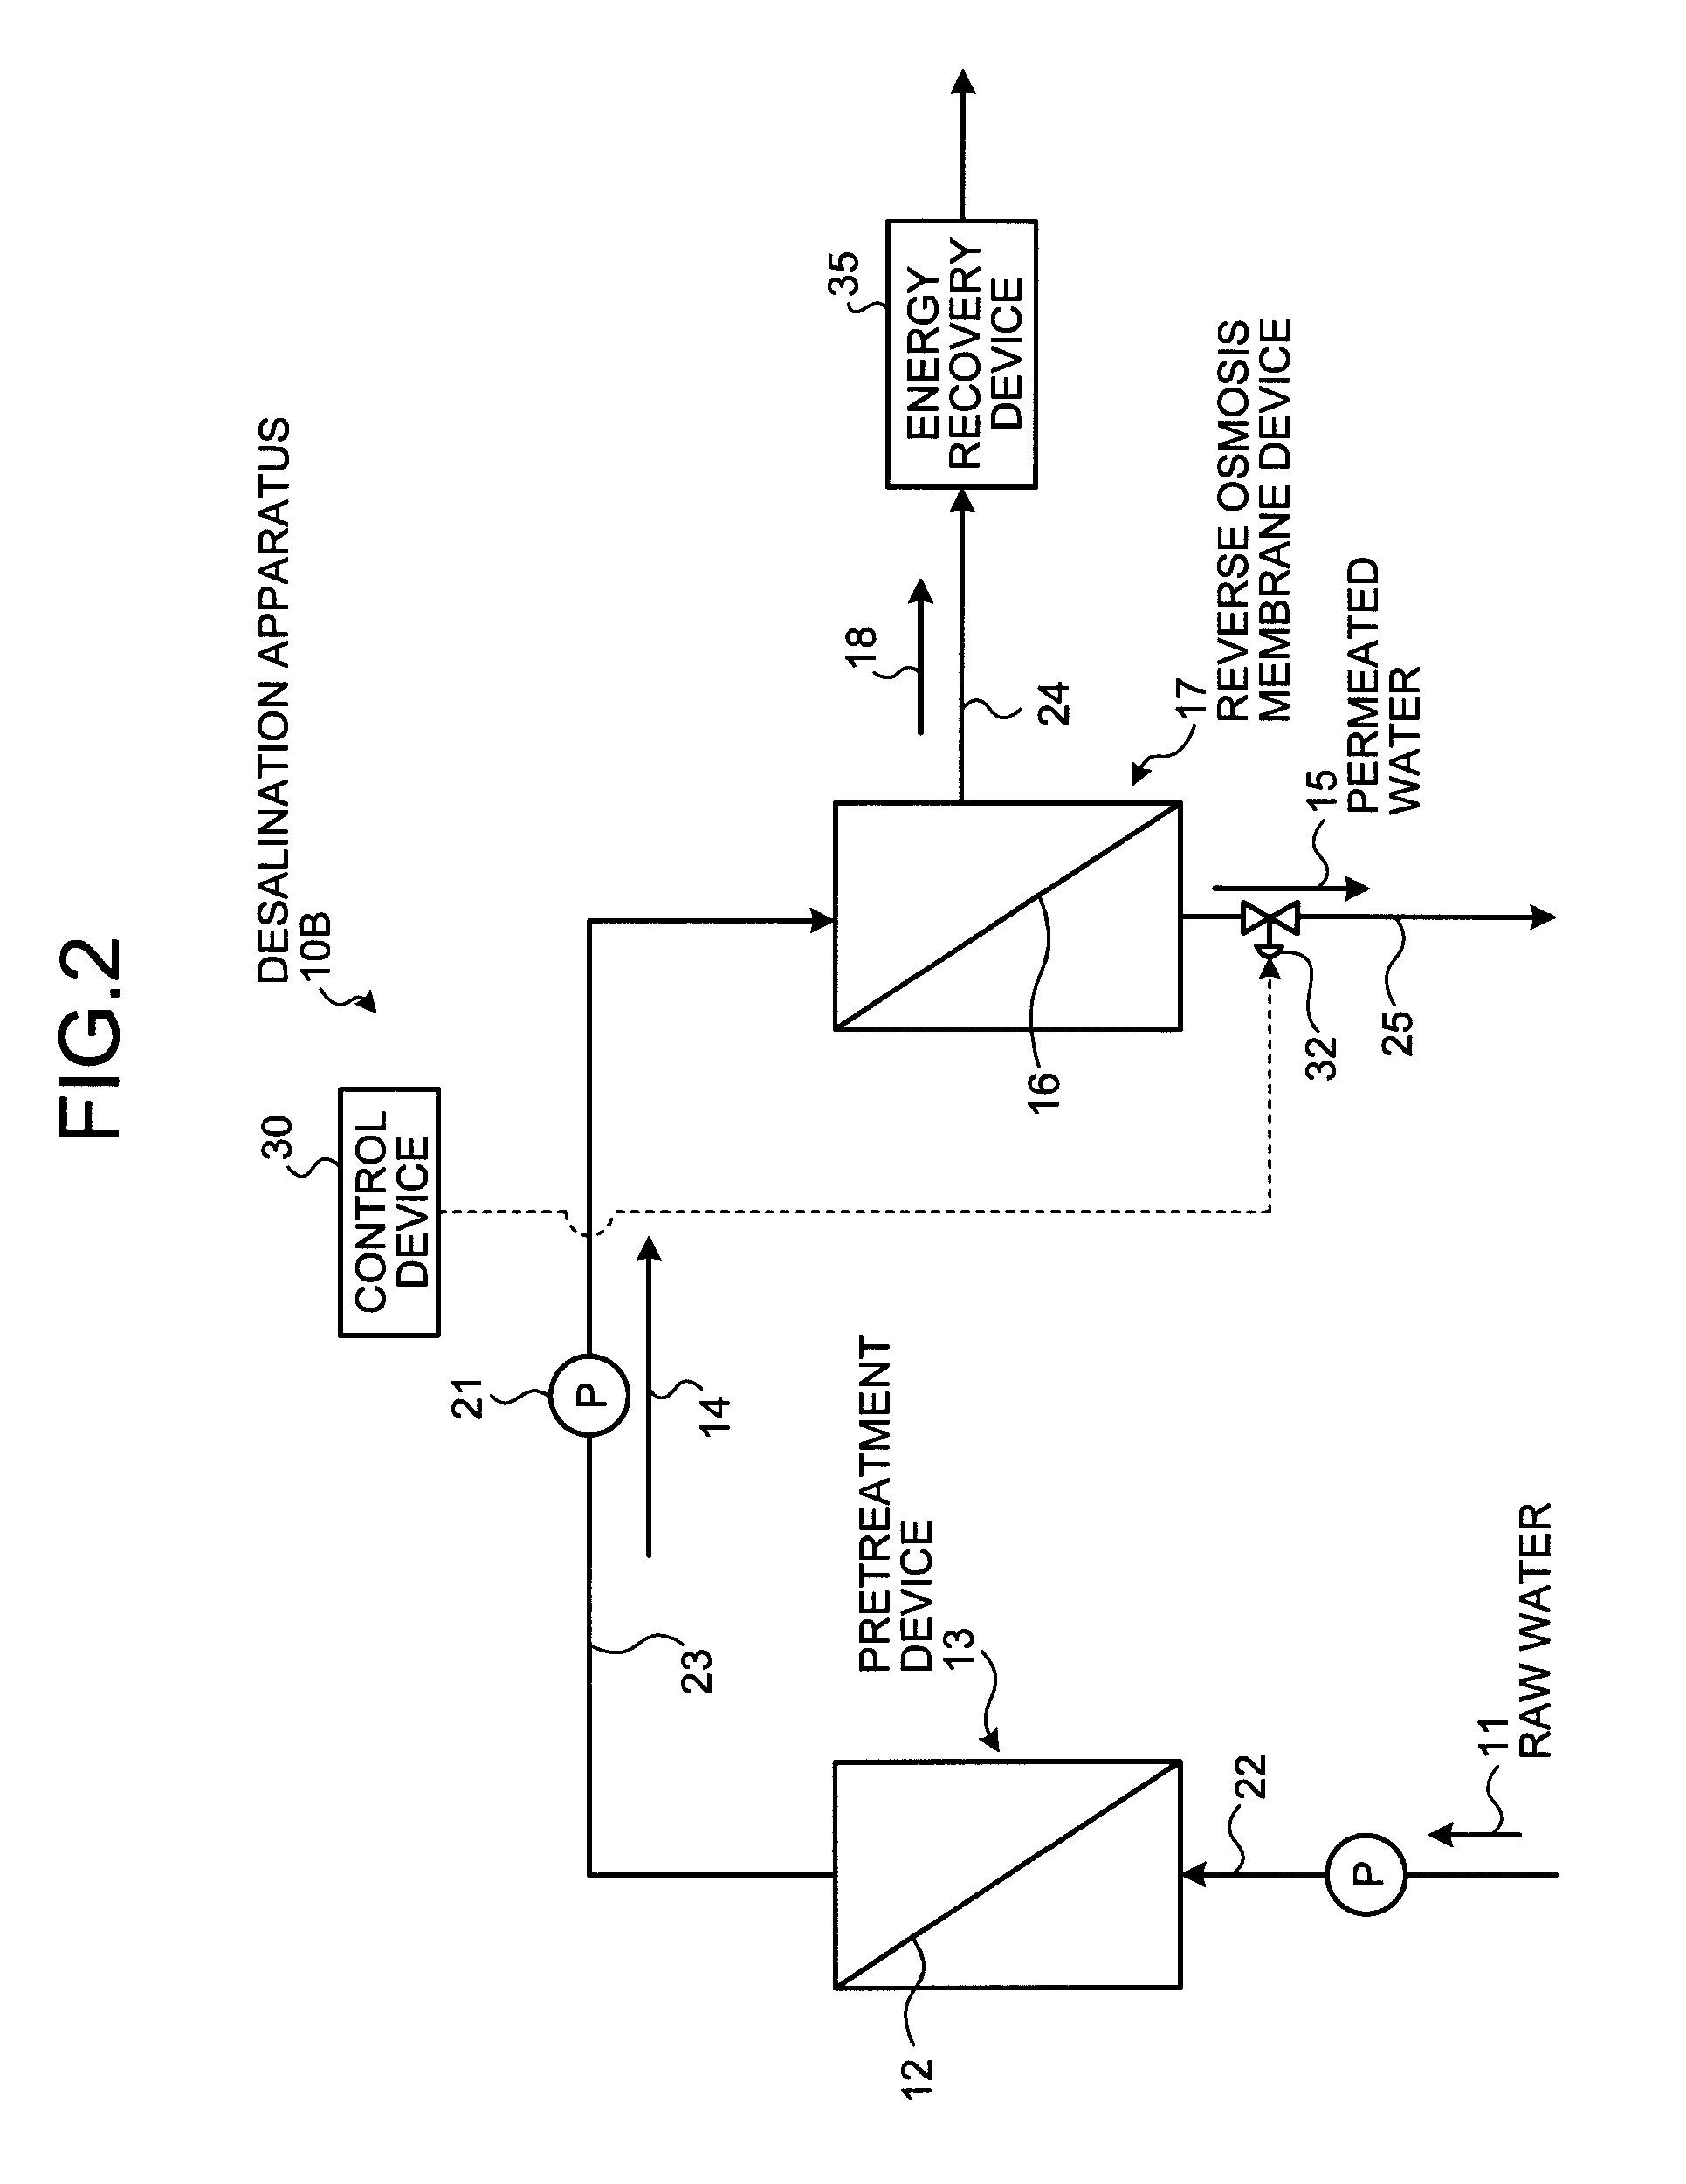 Desalination apparatus and method of cleaning the same